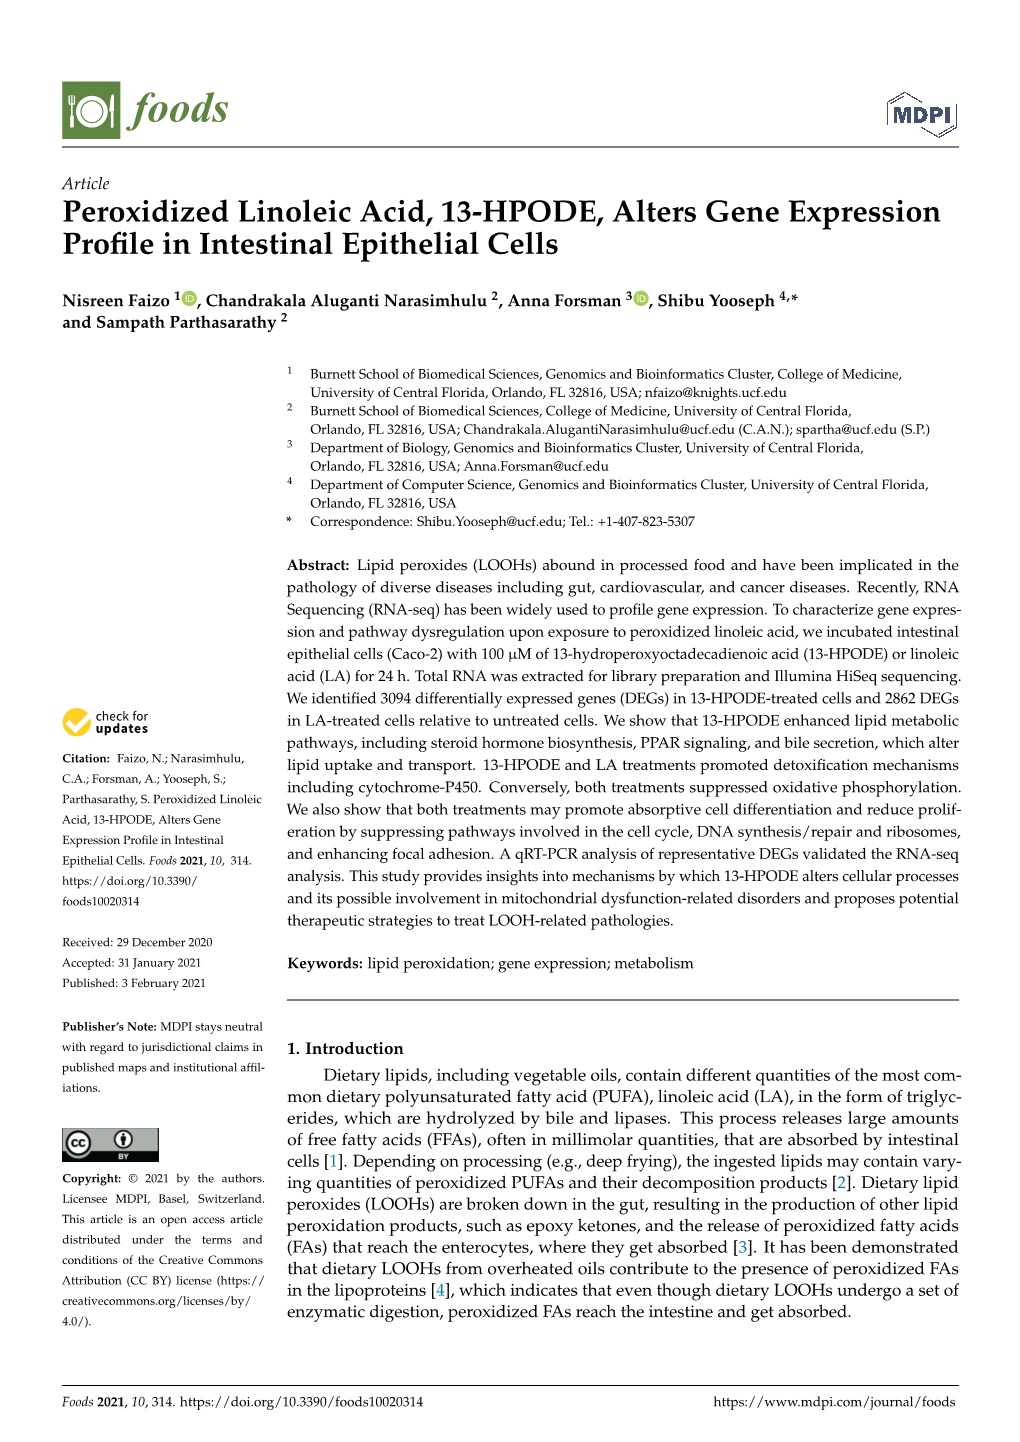 Peroxidized Linoleic Acid, 13-HPODE, Alters Gene Expression Proﬁle in Intestinal Epithelial Cells